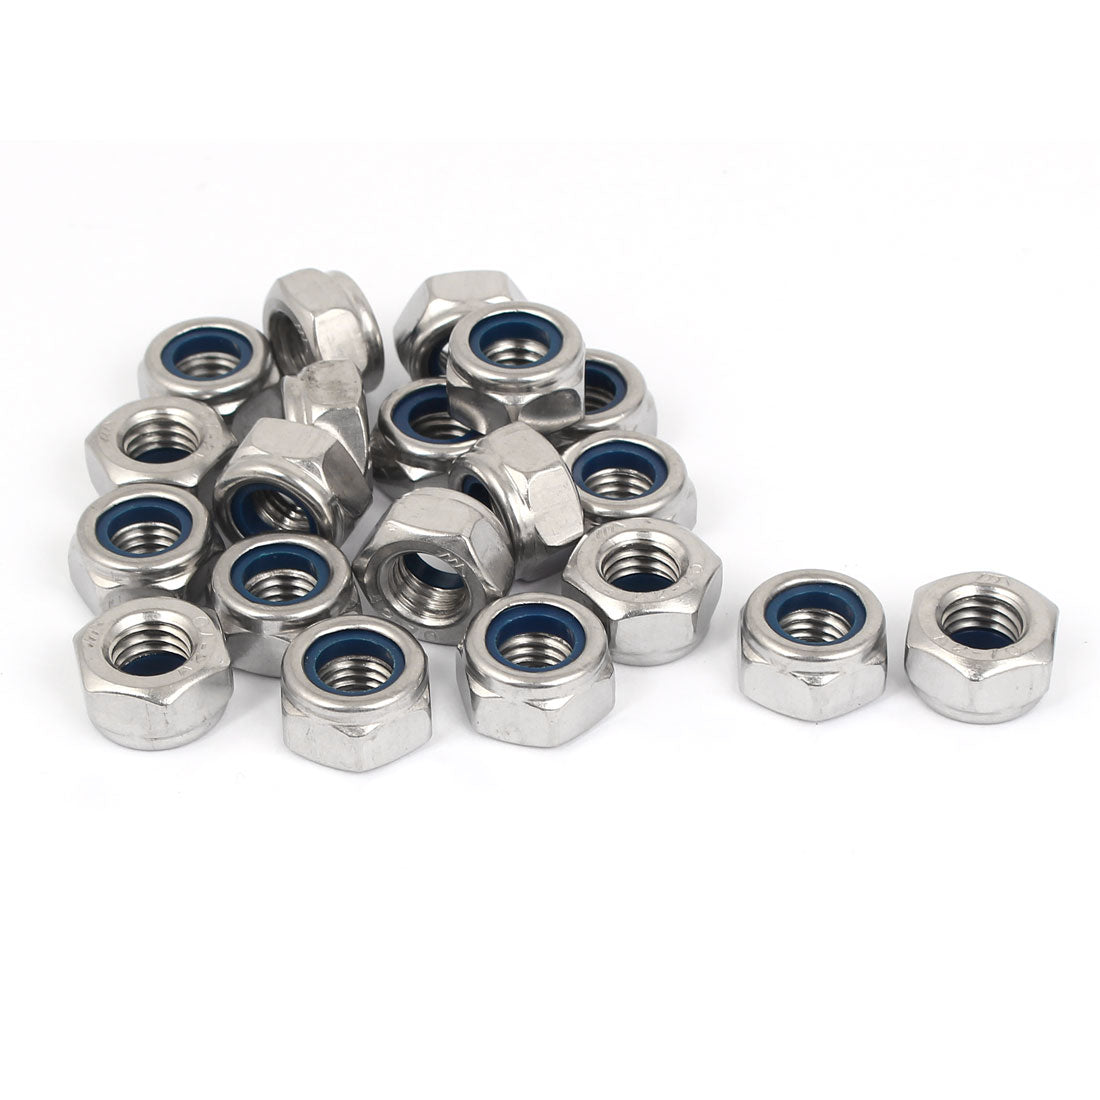 uxcell Uxcell M10 304 Stainless Steel Self-Locking Nylon Insert Hex Lock Nuts 20pcs